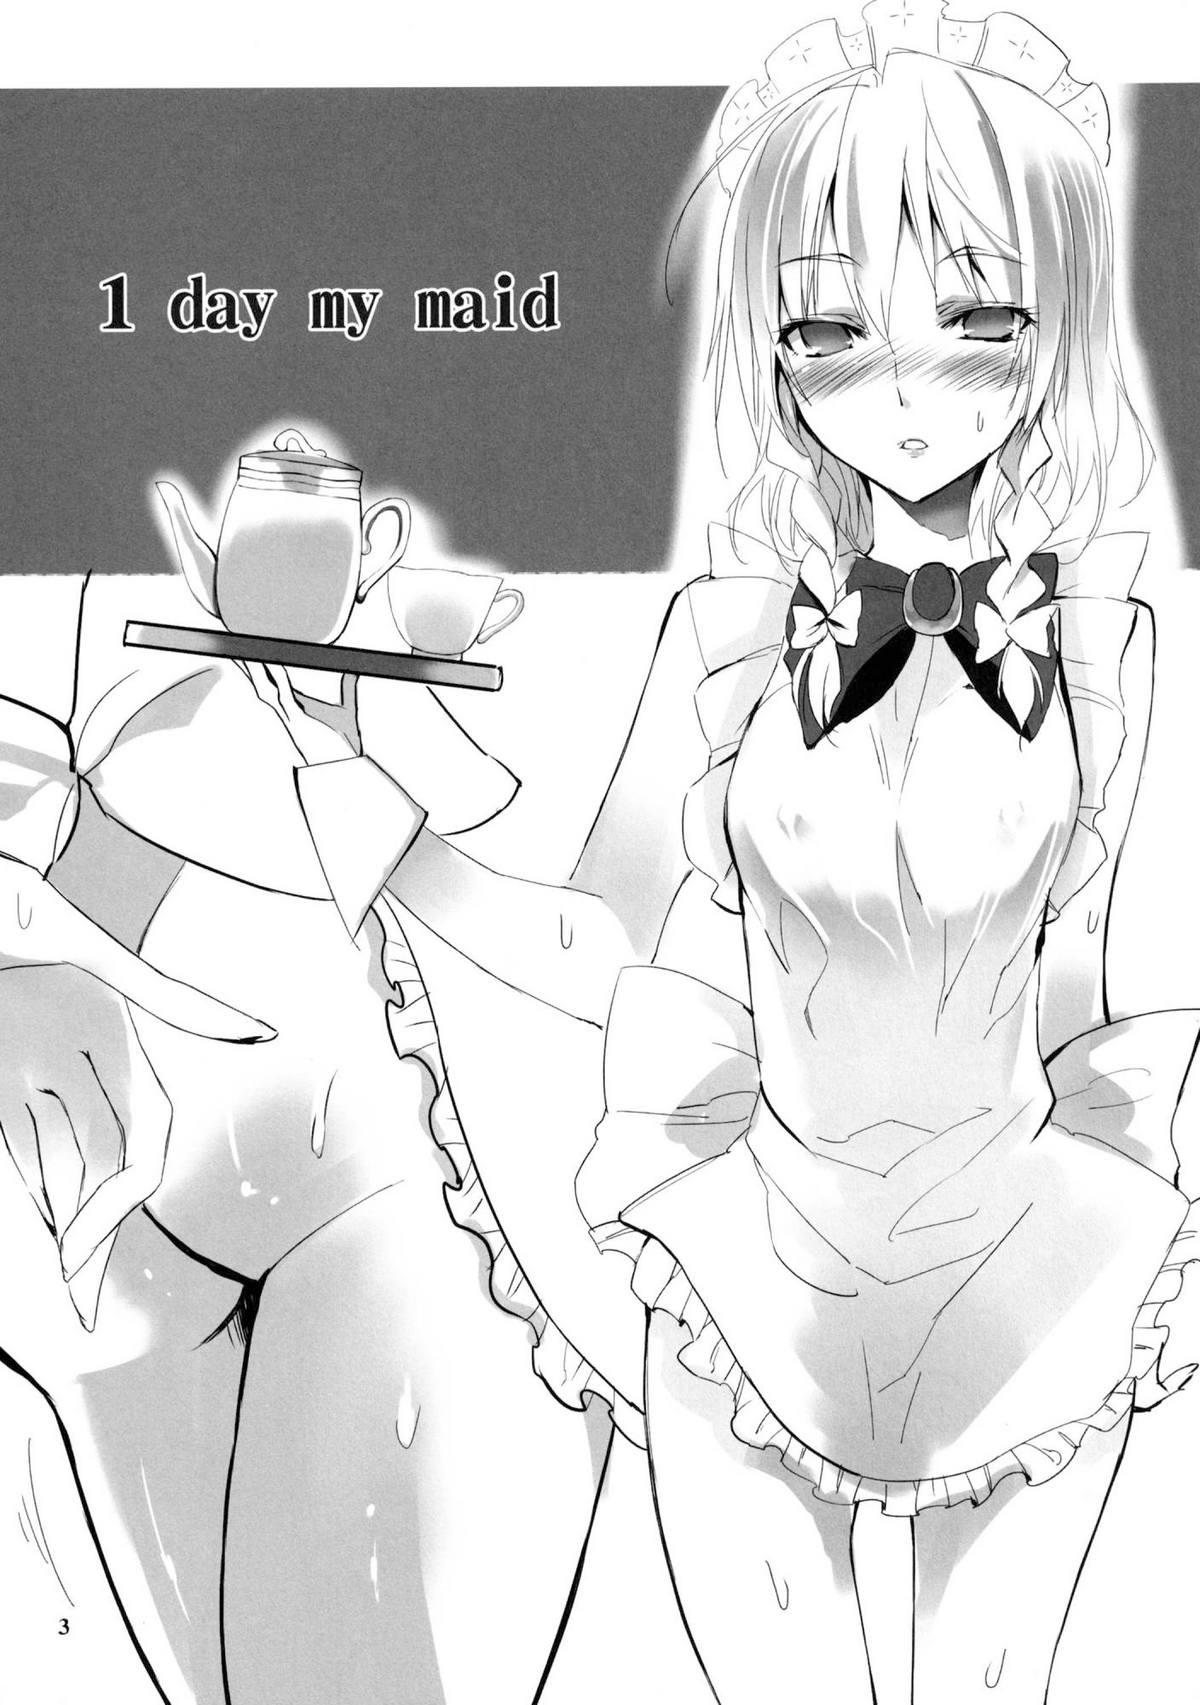 Linda 1 day my maid - Touhou project Amature - Page 3